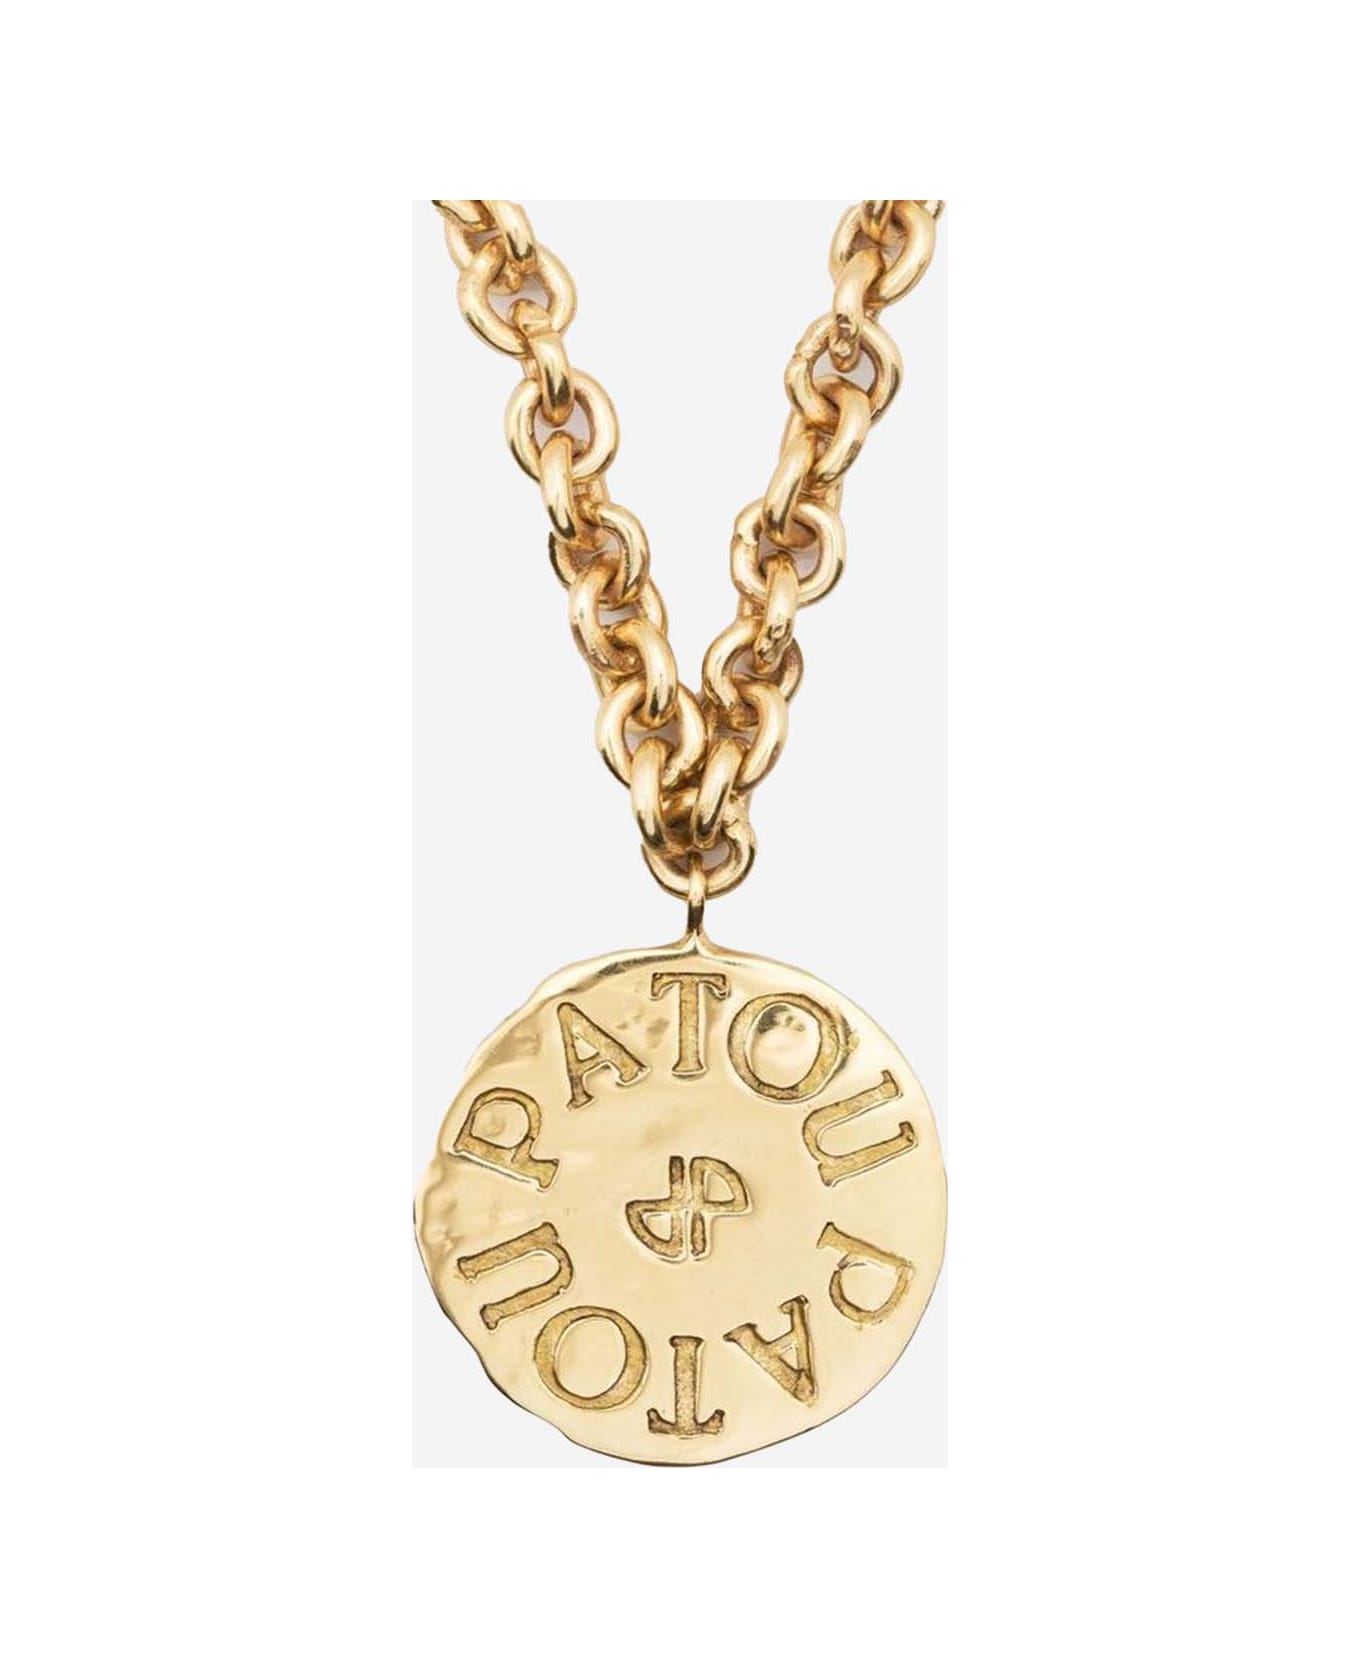 Patou Antique Coin Charm Necklace - Golden ネックレス